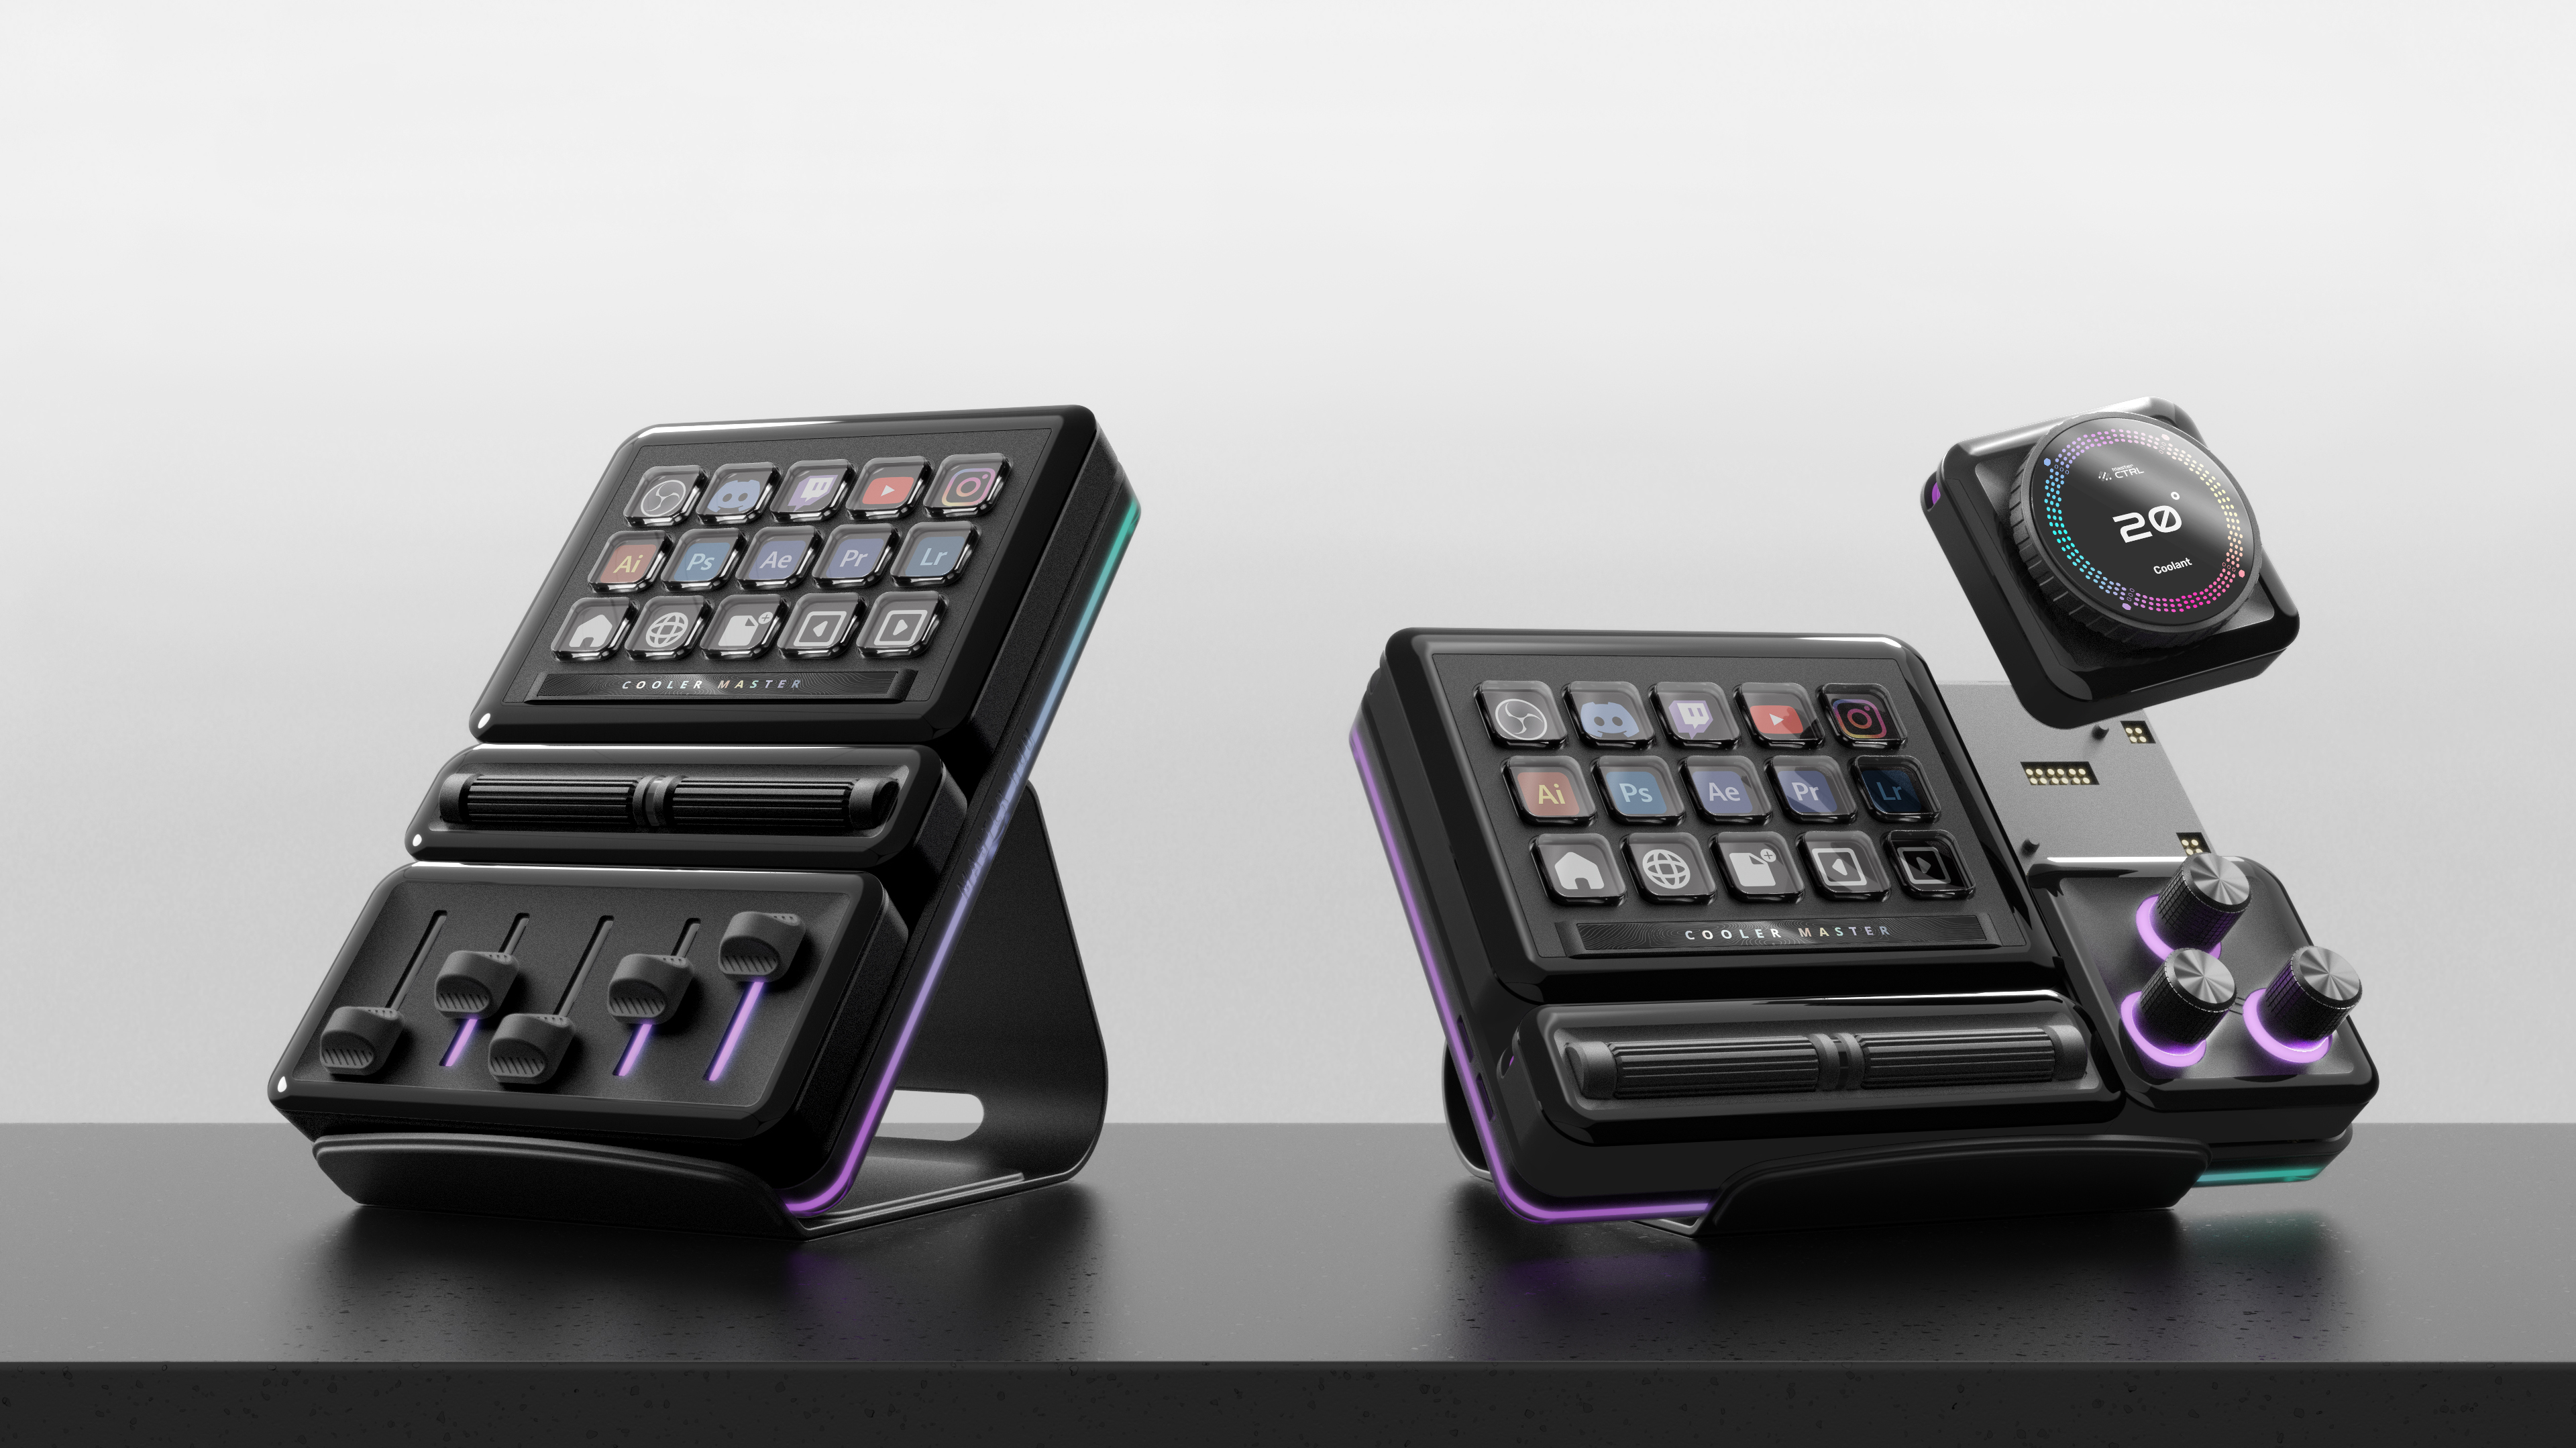 Cooler Master Unveils Innovative Modular Macropad, the MasterHub, with LCD Keys, Sliders, and Rotary Knobs